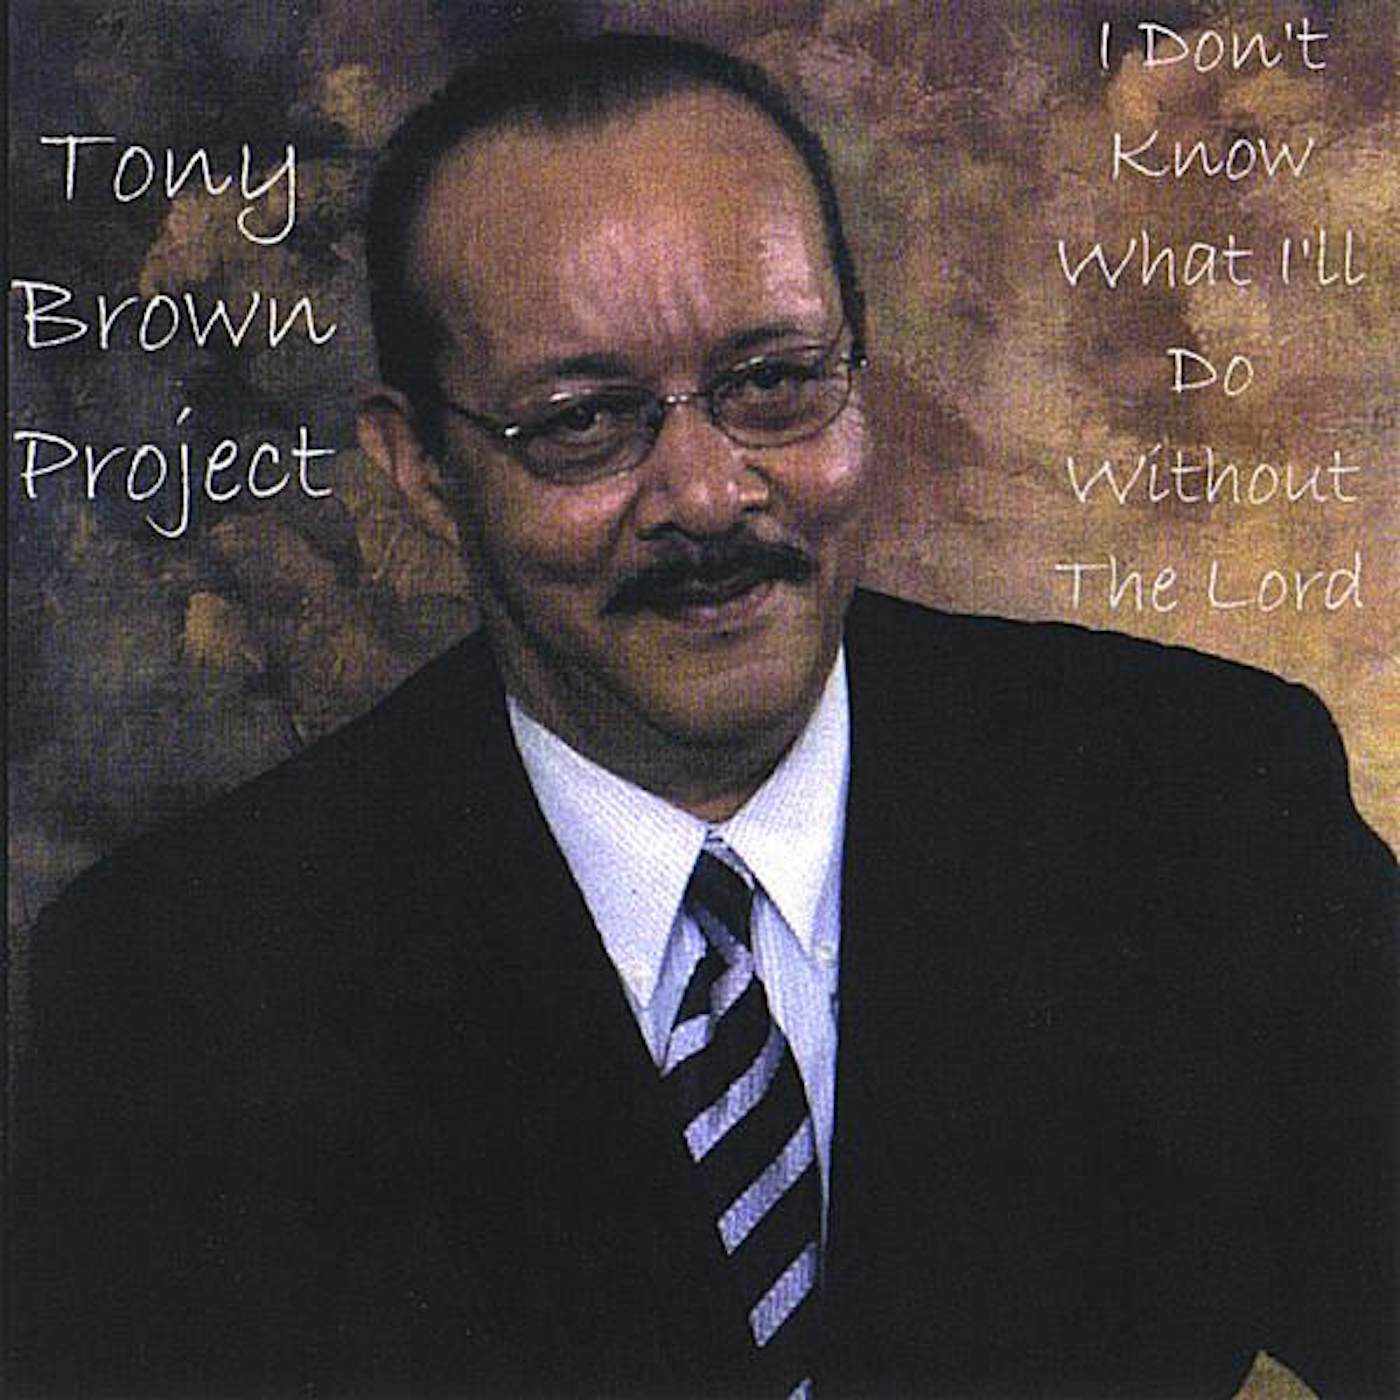 TONY BROWN PROJECT CD